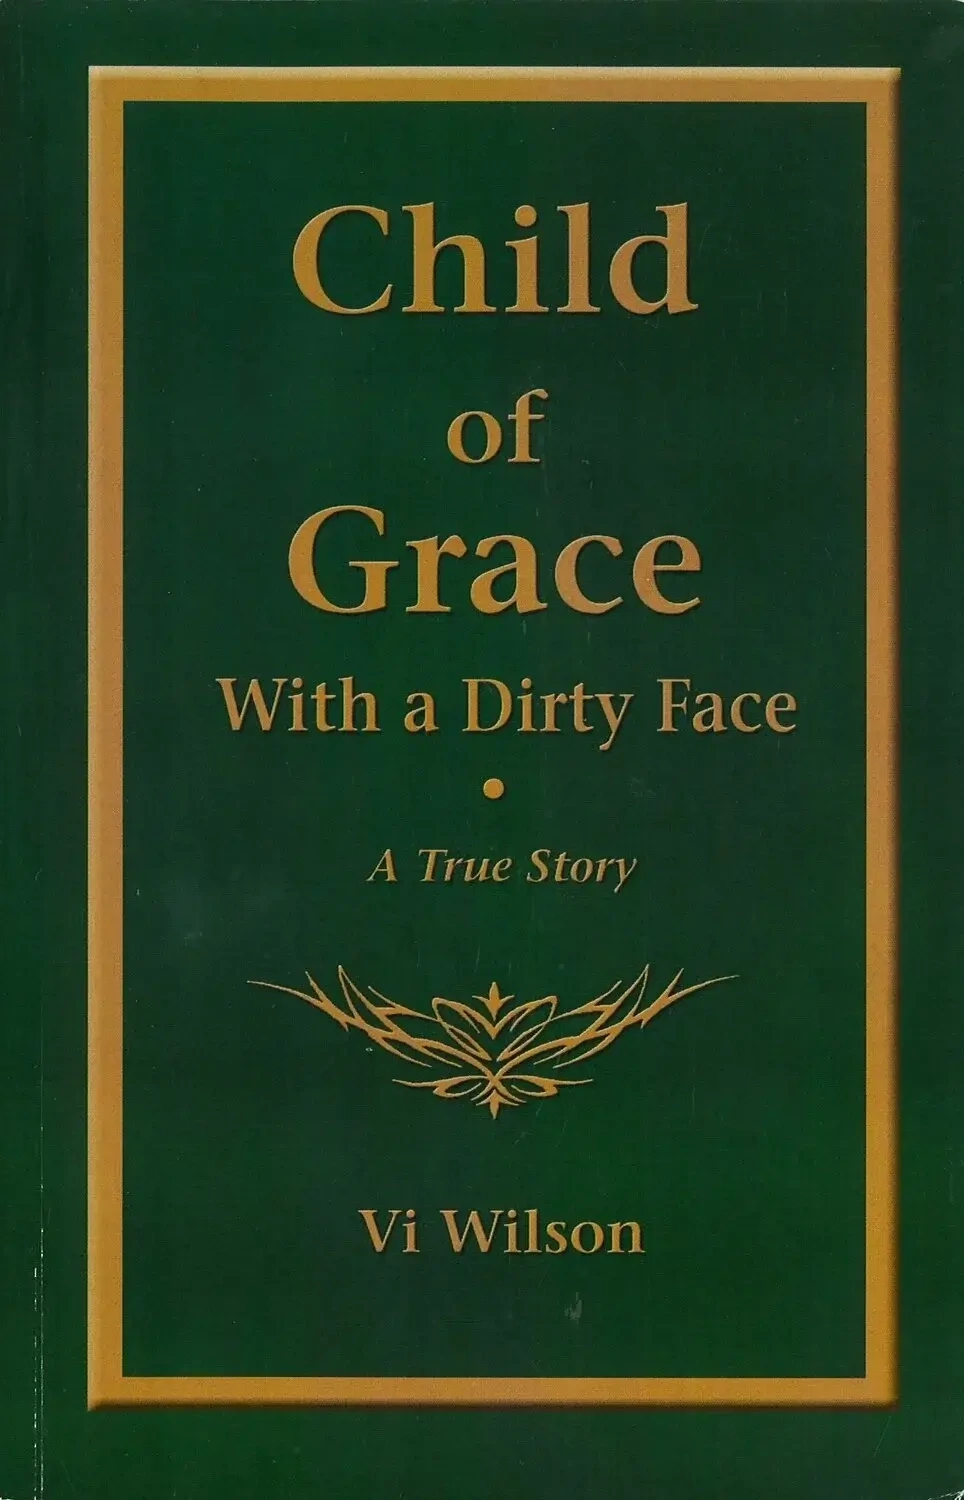 Child of Grace (With a Dirty Face) by Vi Wilson